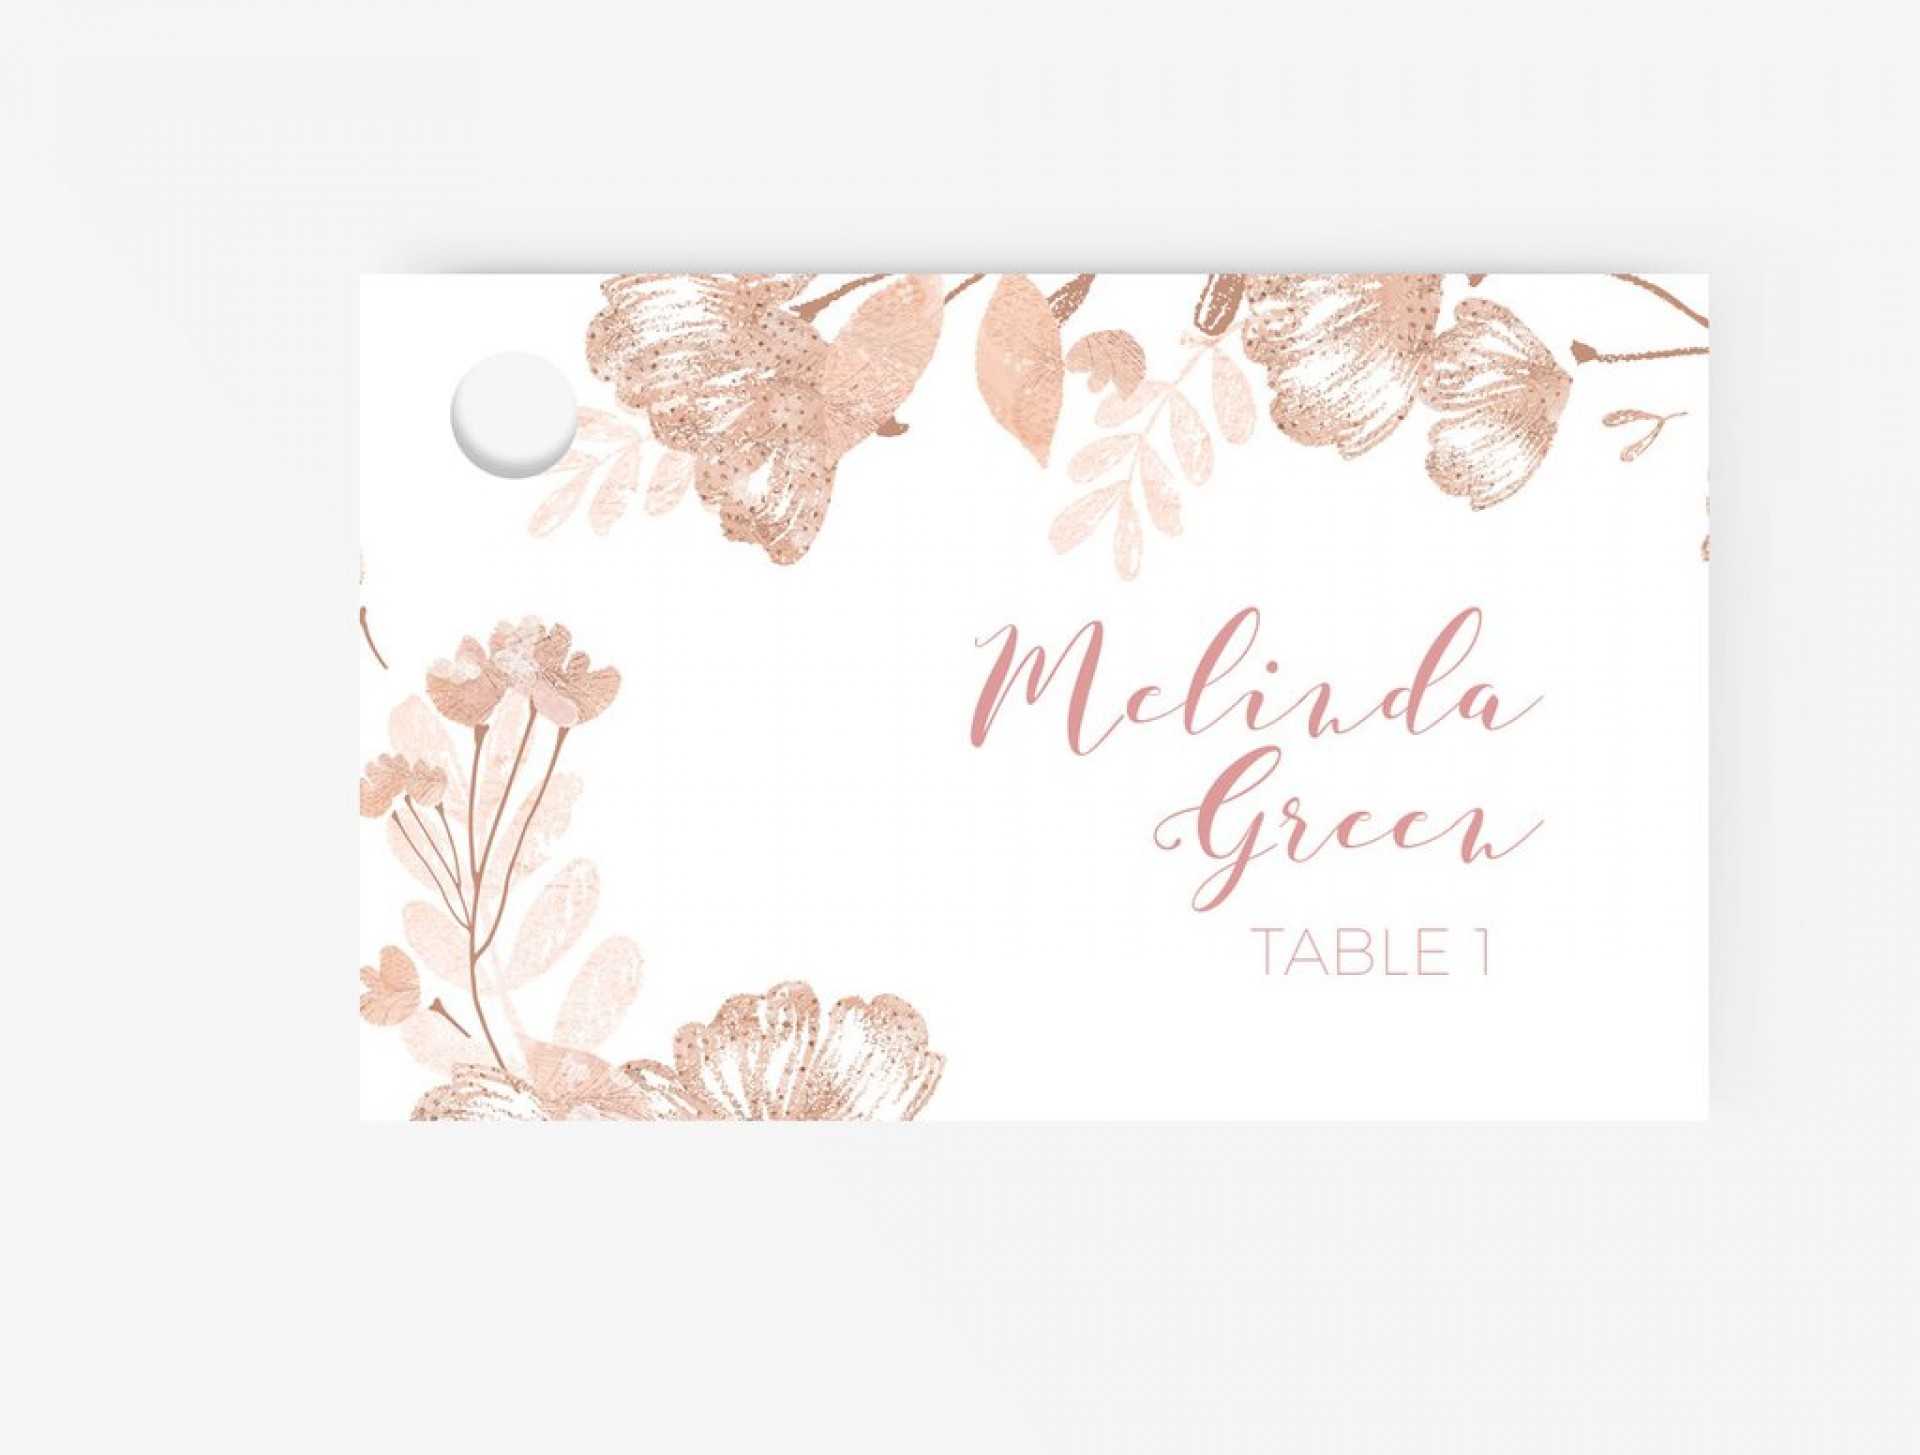 019 Template For Place Cards Il Fullxfull 1542140750 Dg3V Within Place Card Template Free 6 Per Page